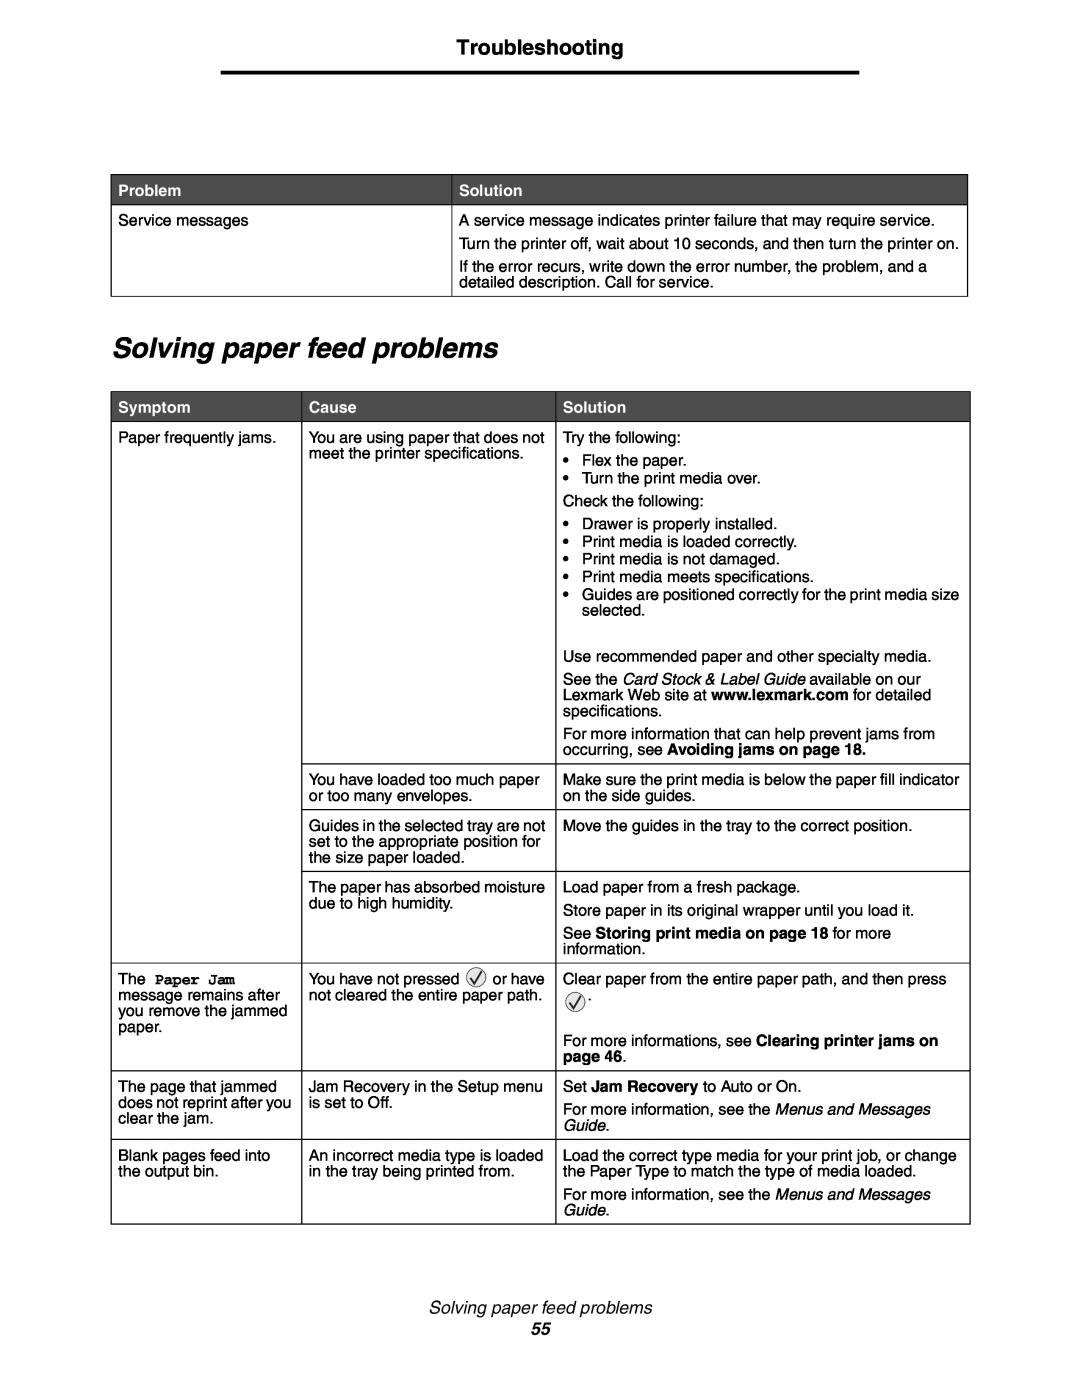 Lexmark 450dn manual Solving paper feed problems, See the Card Stock & Label Guide available on our, The Paper Jam, page 